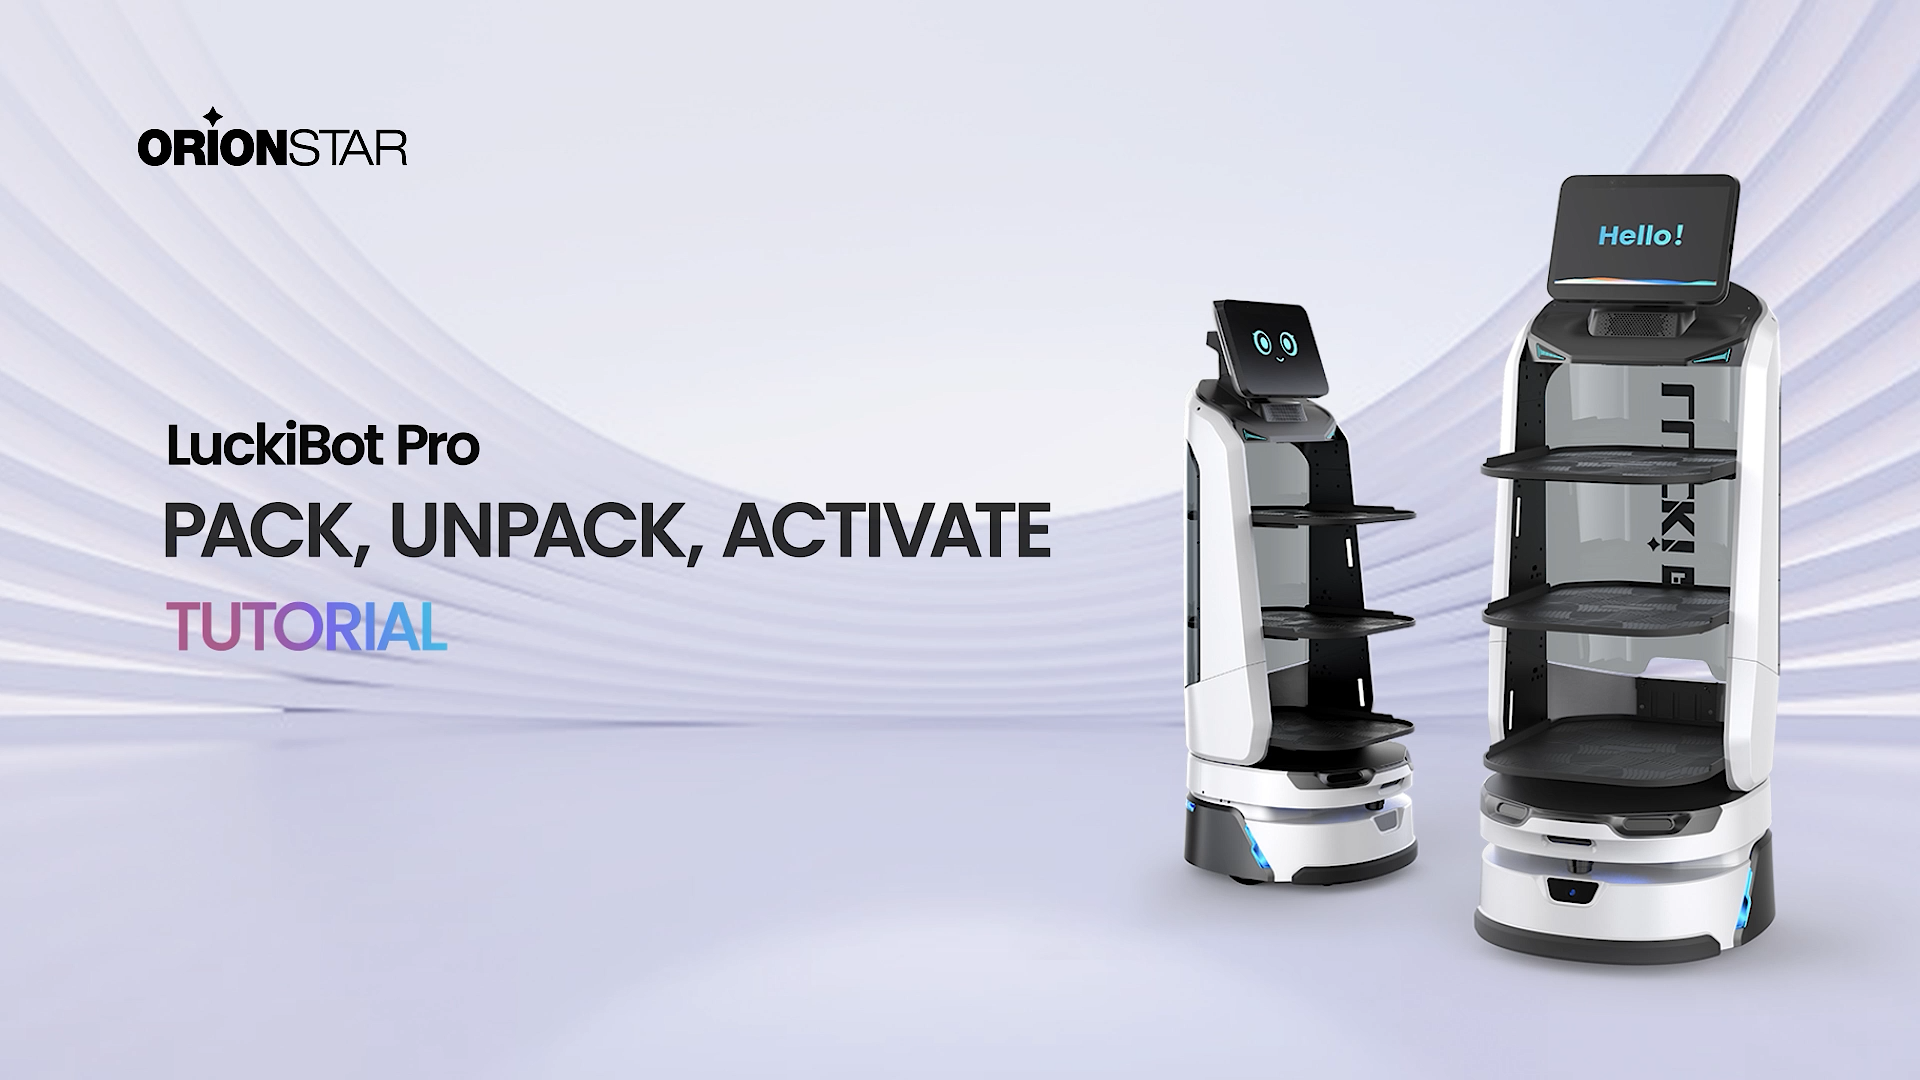 Experience the Tutorial of LuckiBot Pro: Packing, Unpacking, and Activation.